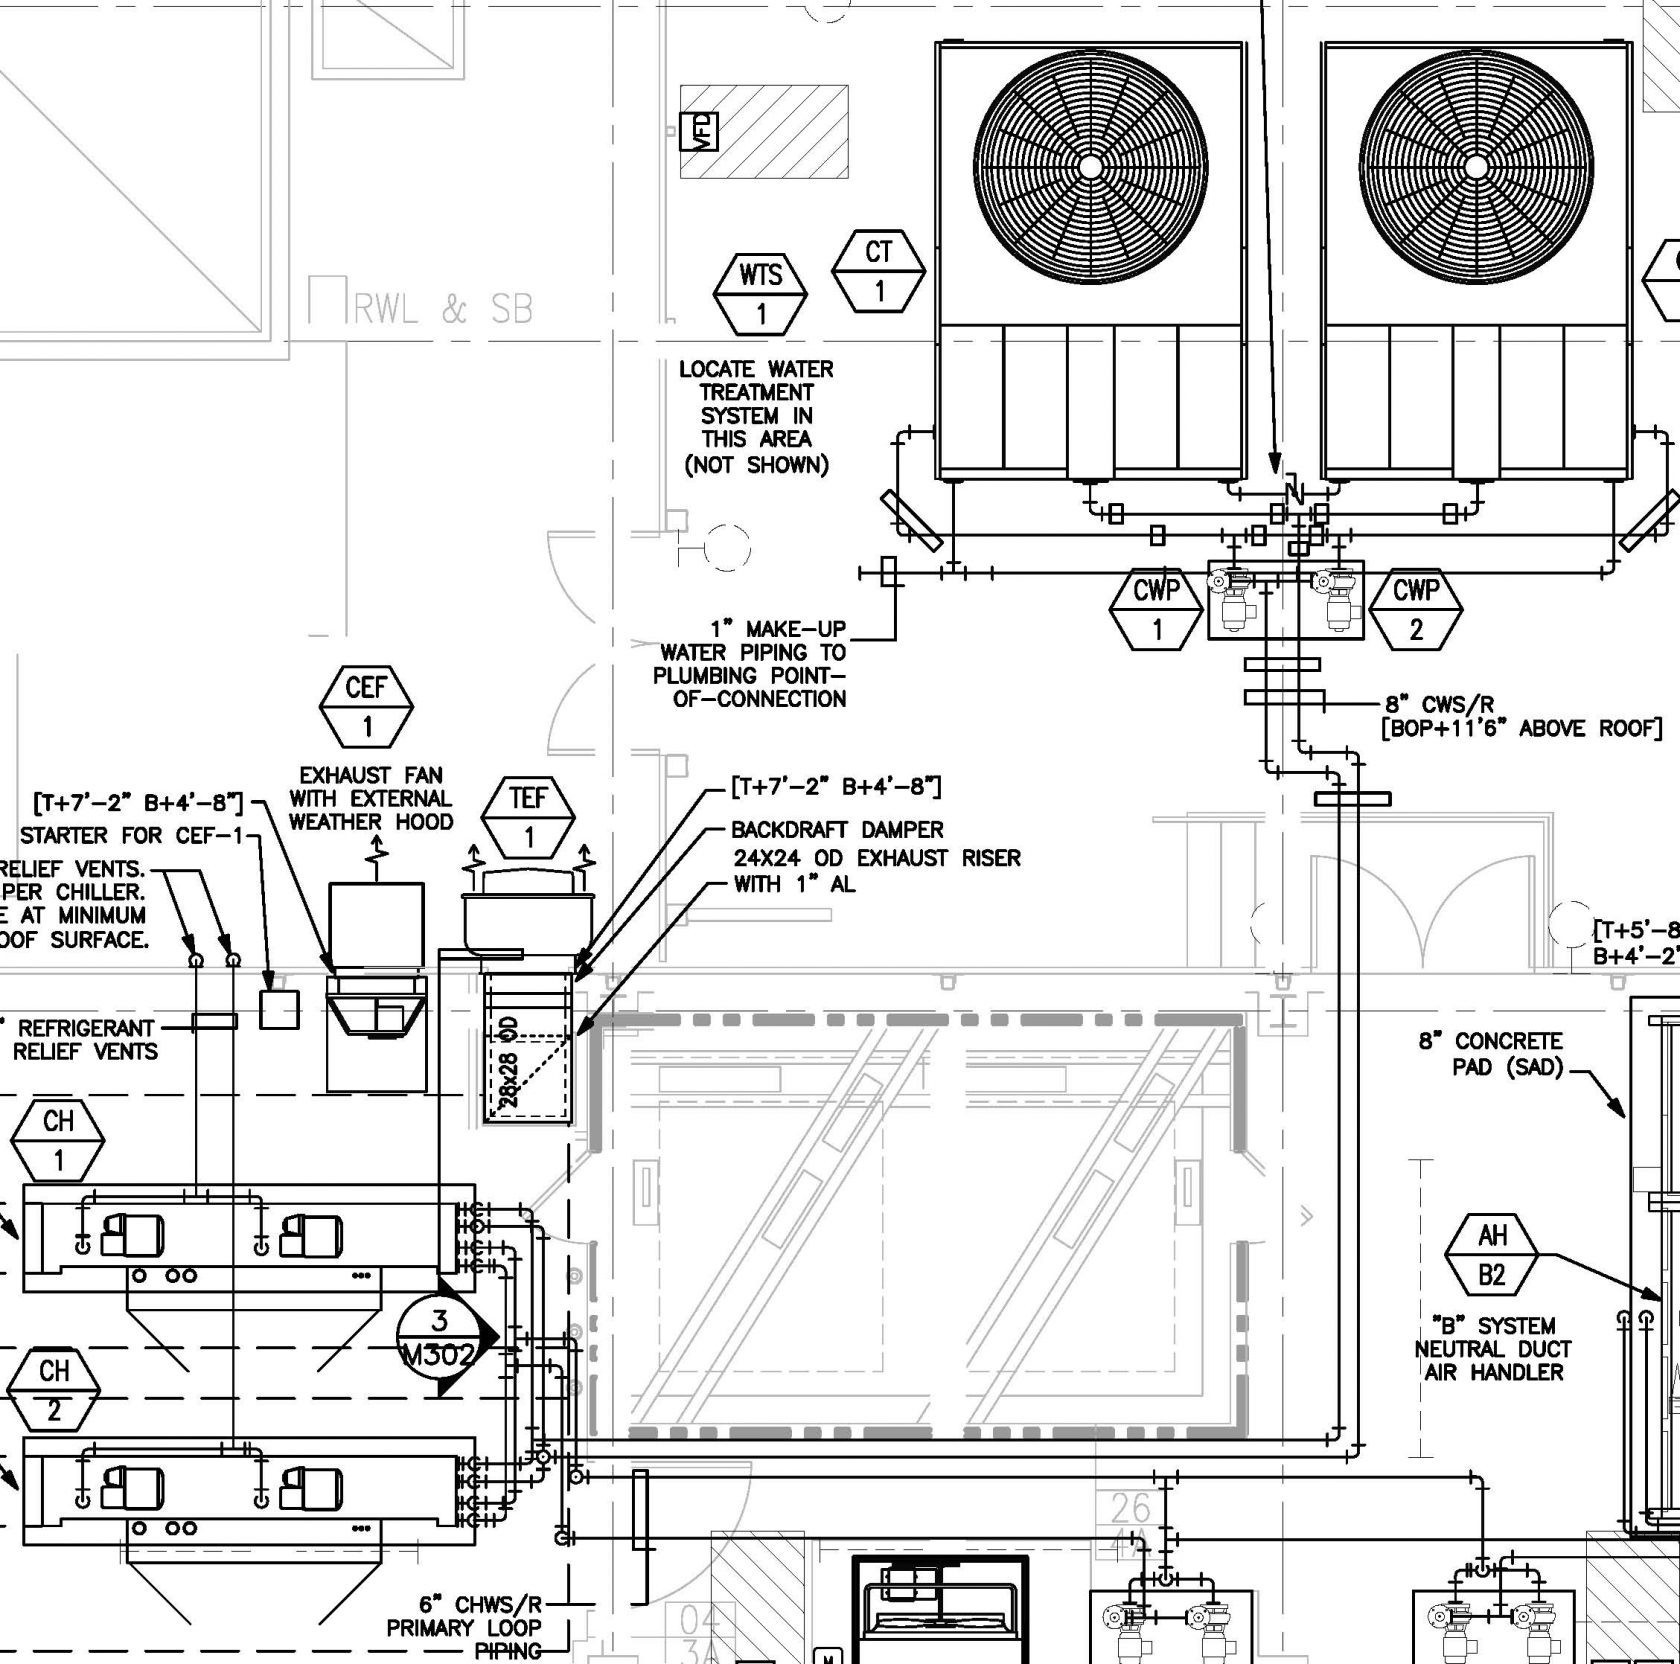 Electrical Panel Diagram New Electrical Panel Wiring Diagram Awesome Split Air Conditionering